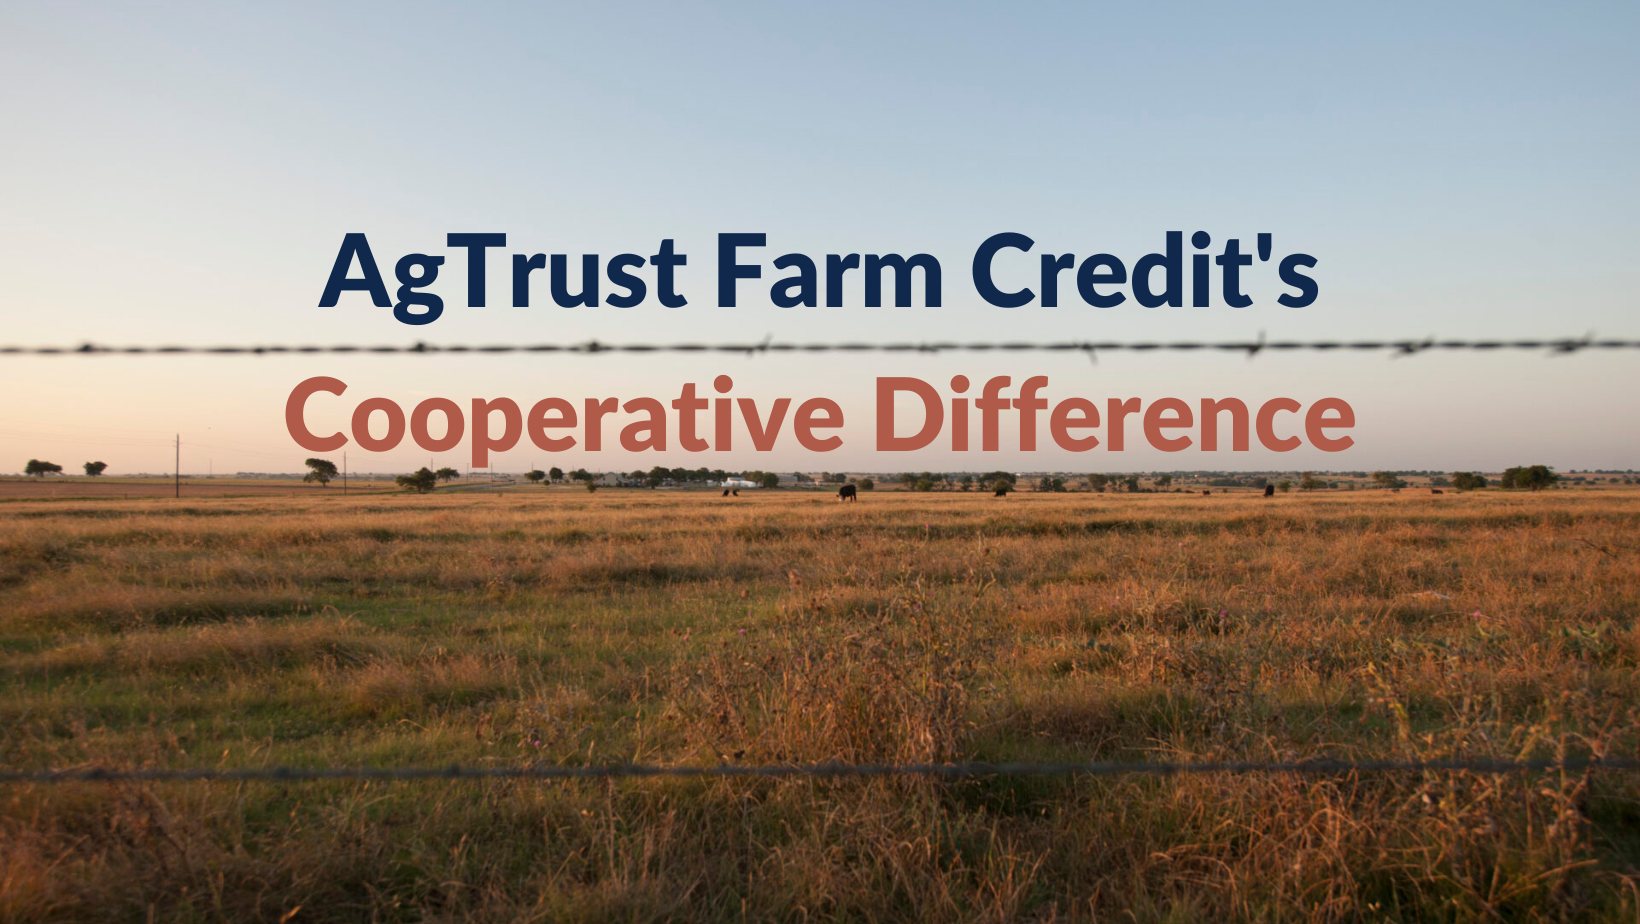 AgTrust Farm Credit's Cooperative Difference